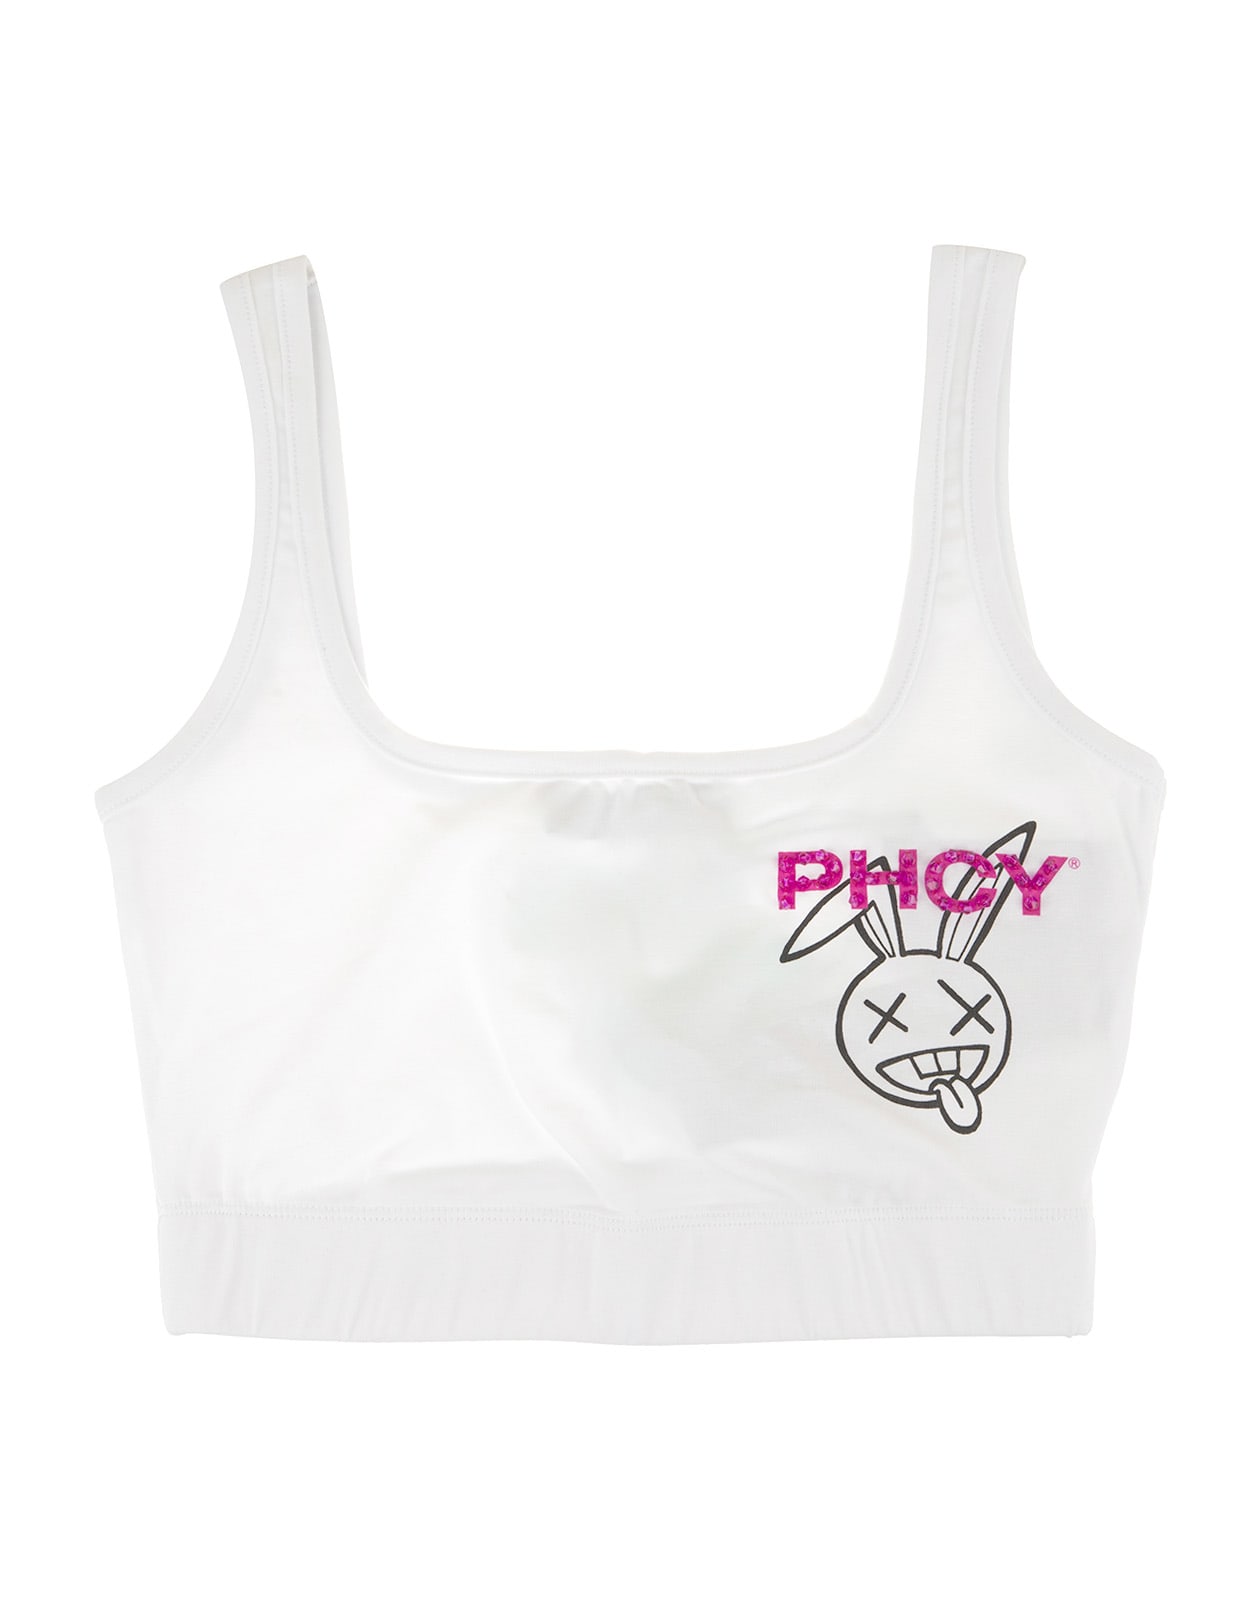 Pharmacy Industry White Sports Short Top With Rabbit And Monogram